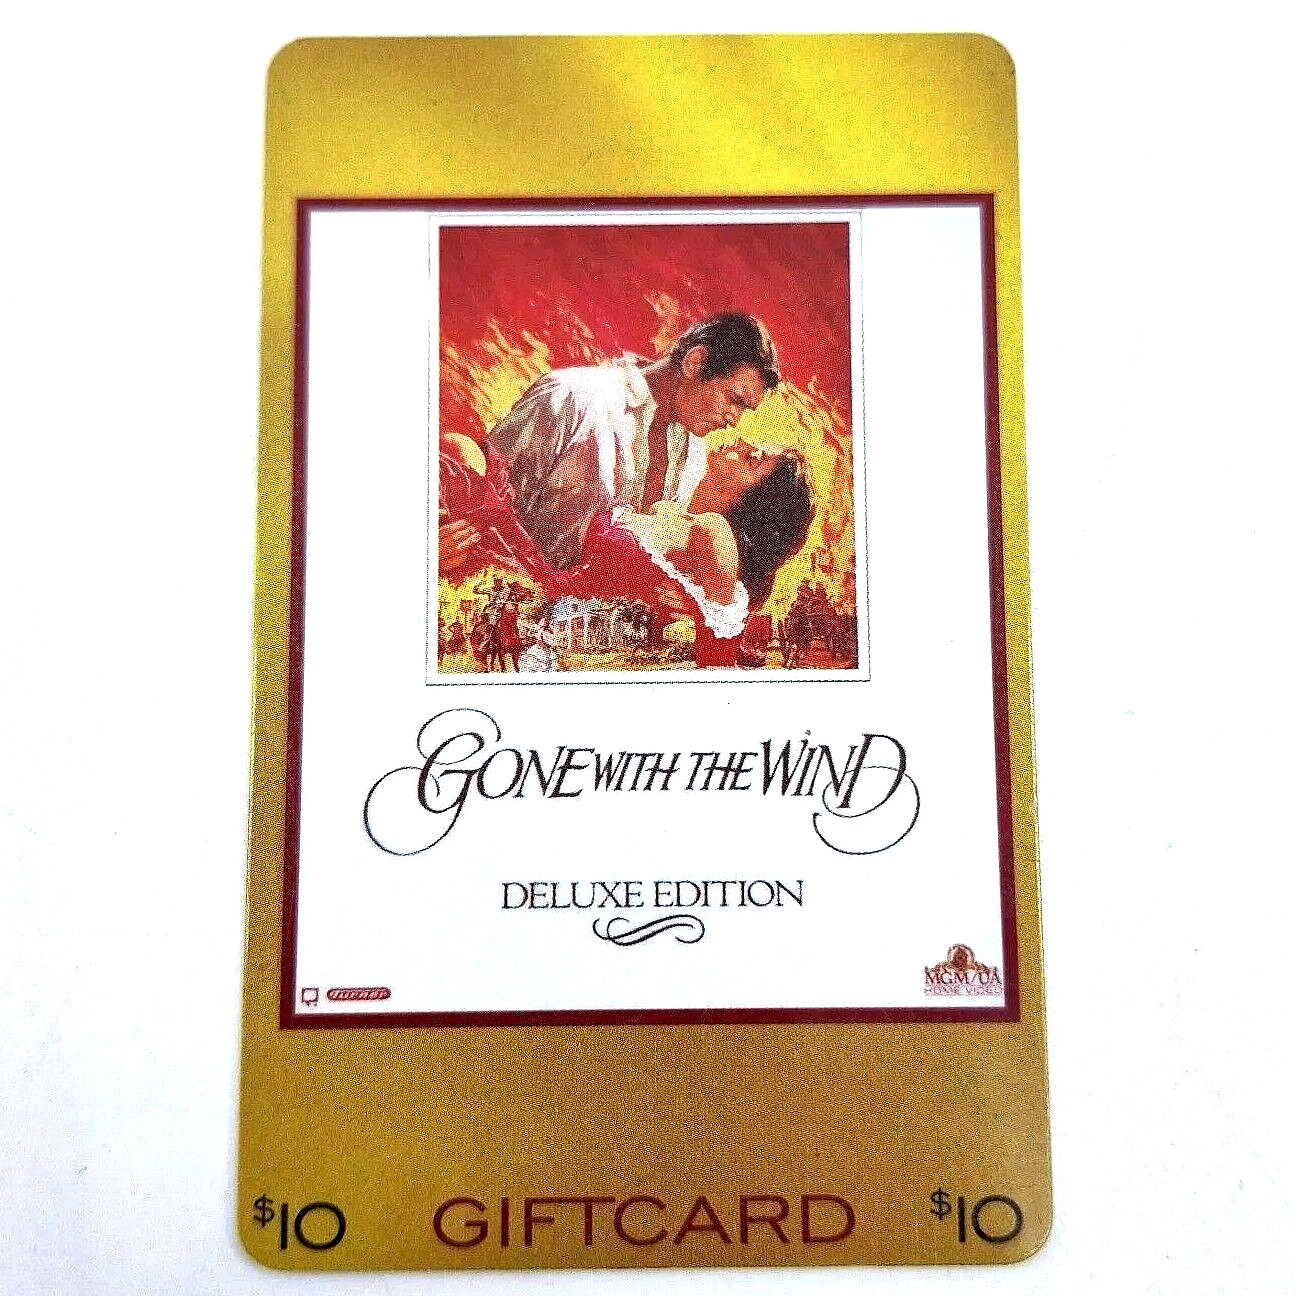 Gone with the Wind BLOCKBUSTER Video Gift Card -NO VALUE ON CARD-